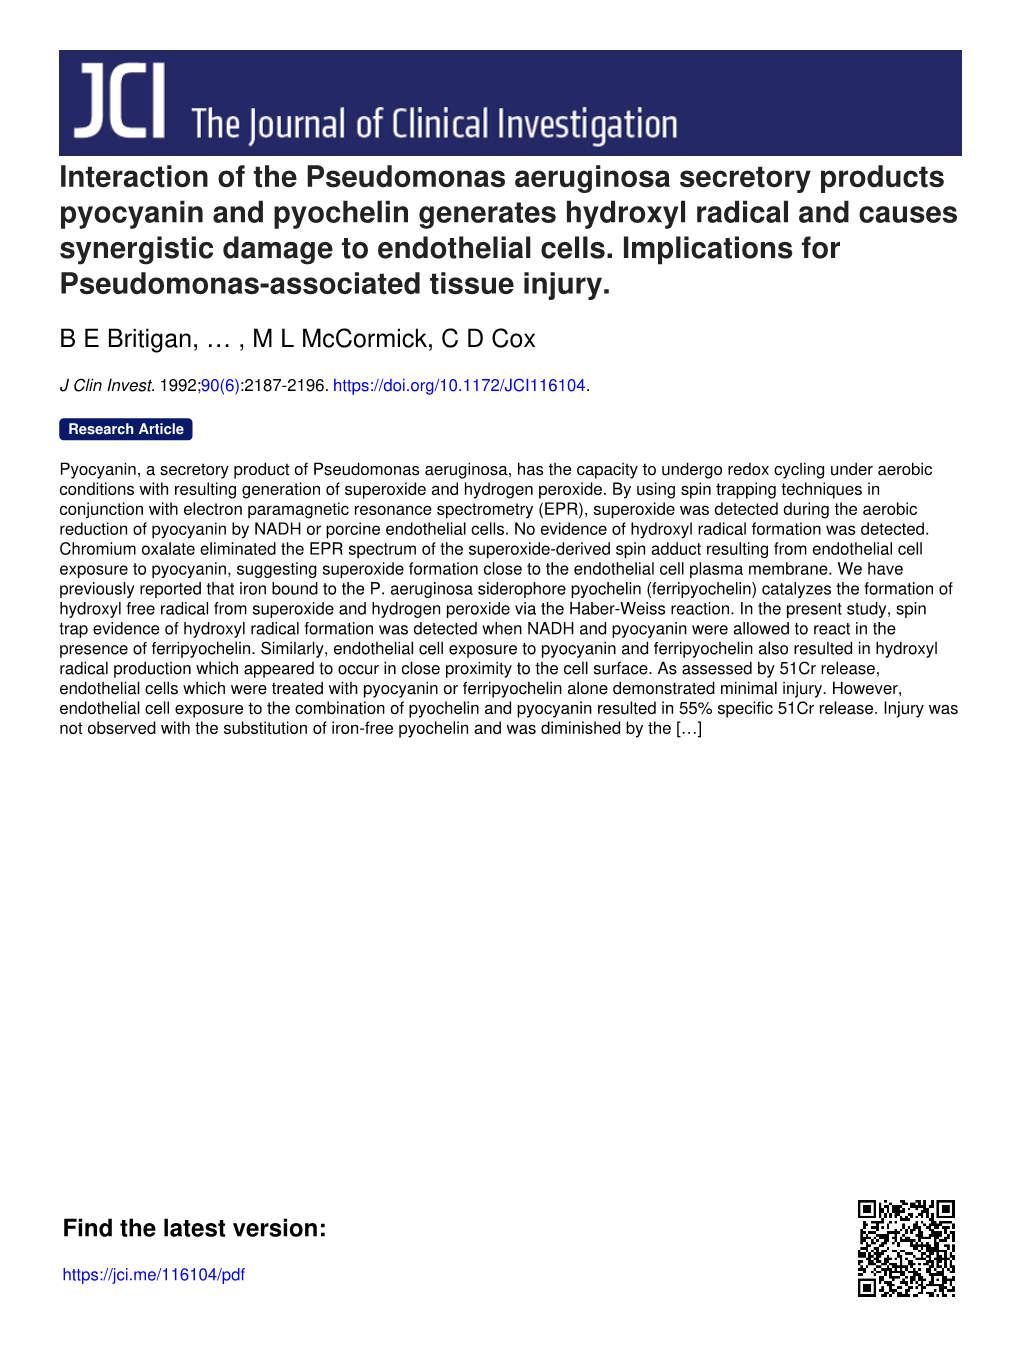 Interaction of the Pseudomonas Aeruginosa Secretory Products Pyocyanin and Pyochelin Generates Hydroxyl Radical and Causes Synergistic Damage to Endothelial Cells